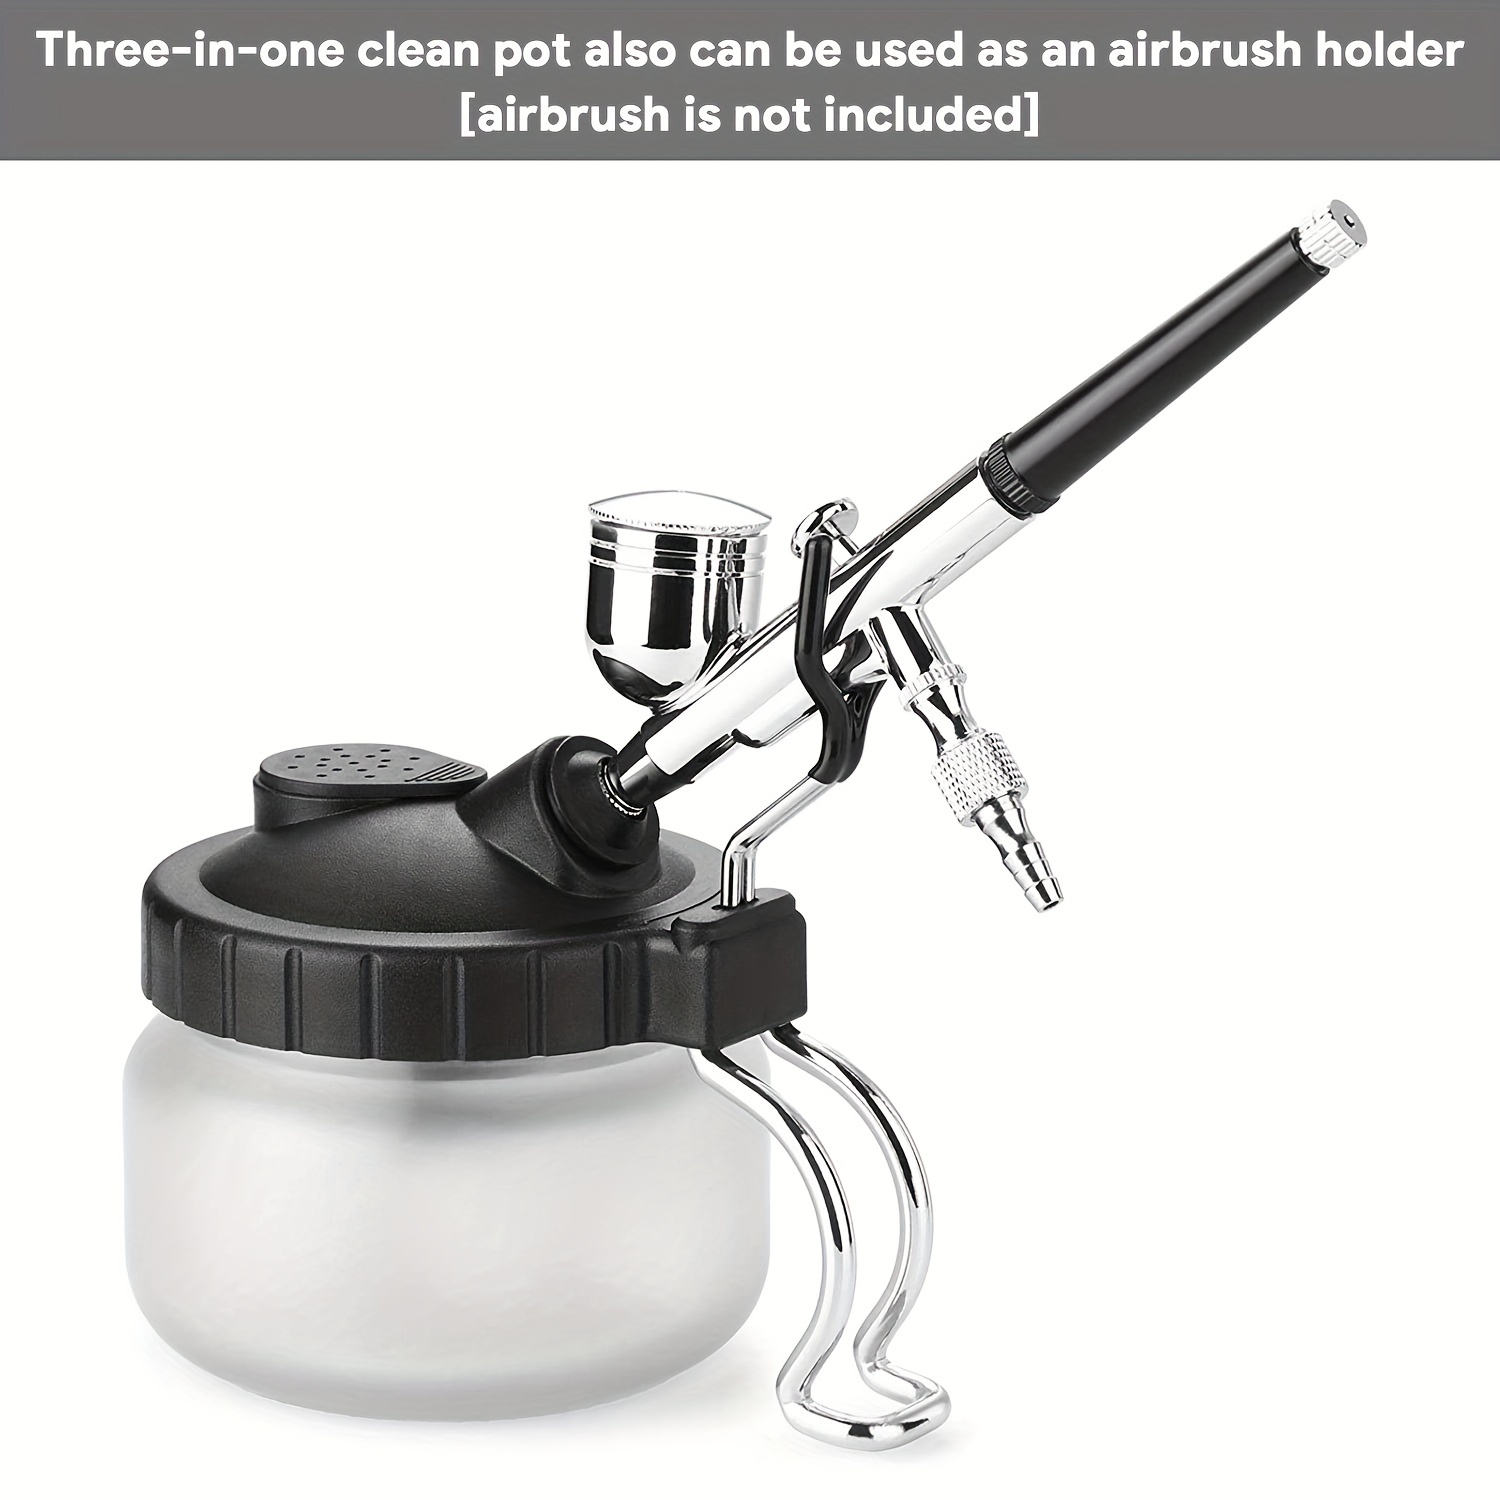  Sparmax Airbrush Cleaning Pot : Arts, Crafts & Sewing